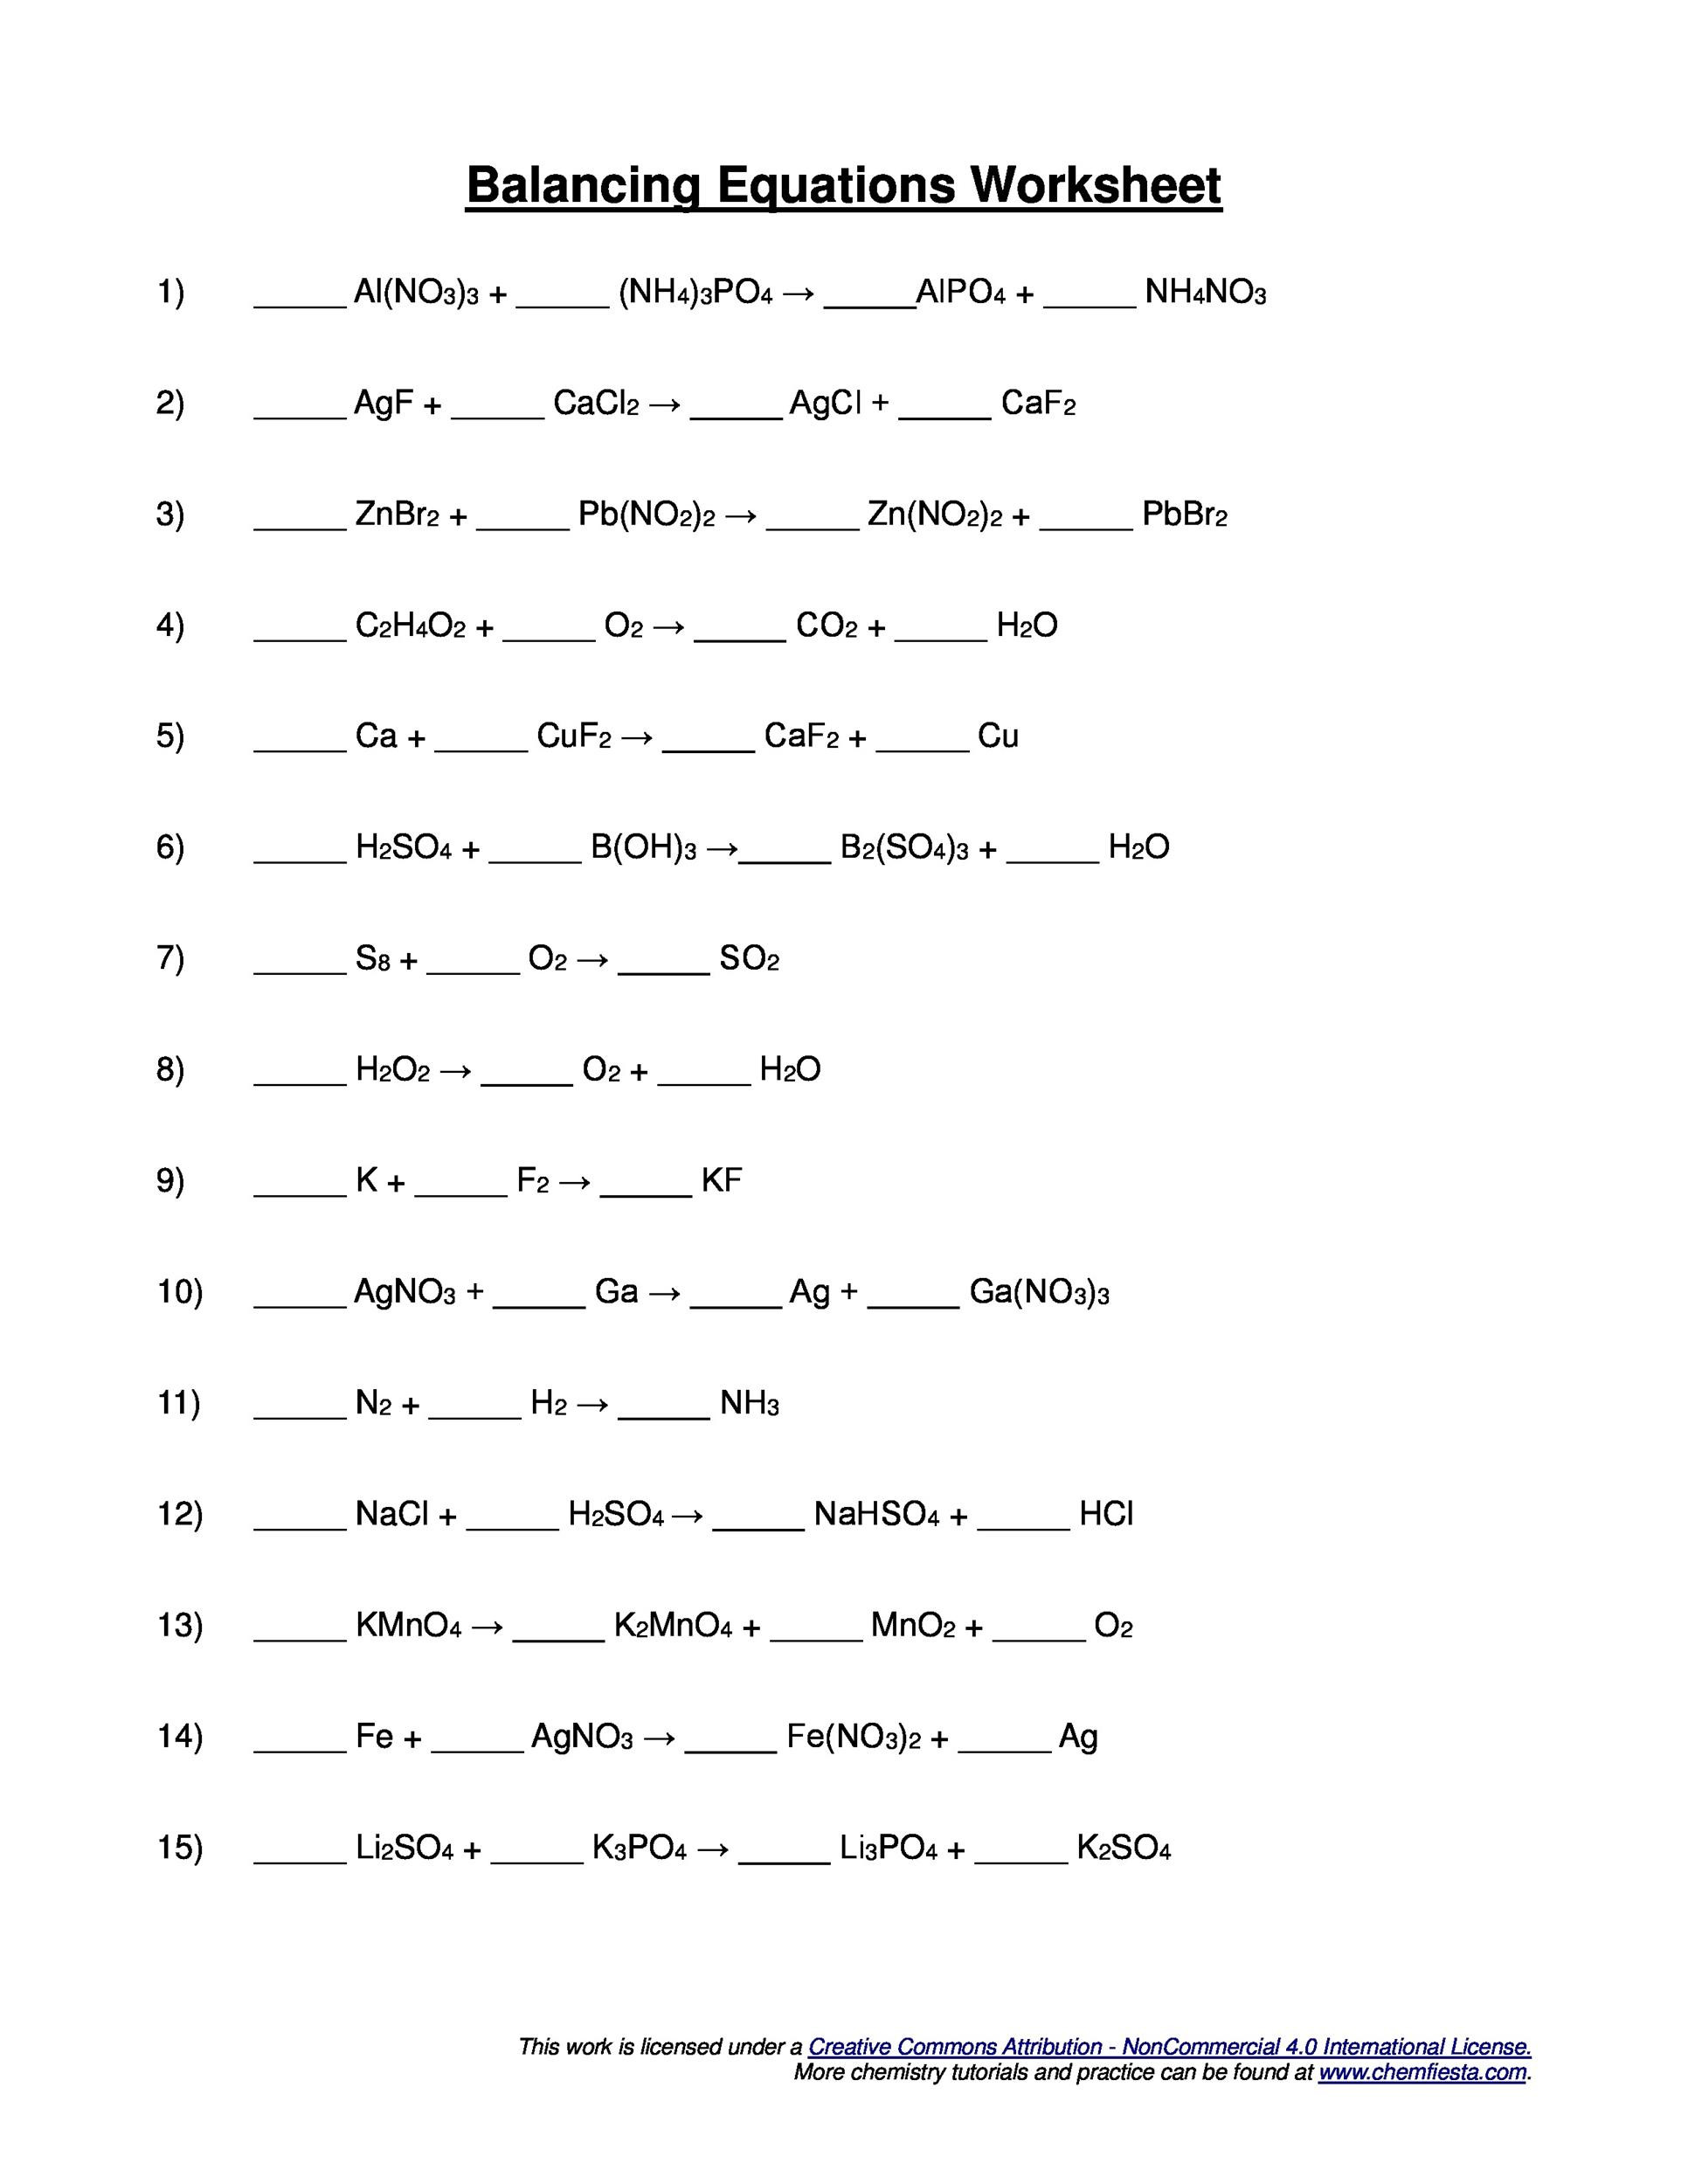 Balancing Equations Practice Worksheet Answers 49 Balancing Chemical Equations Worksheets [with Answers]